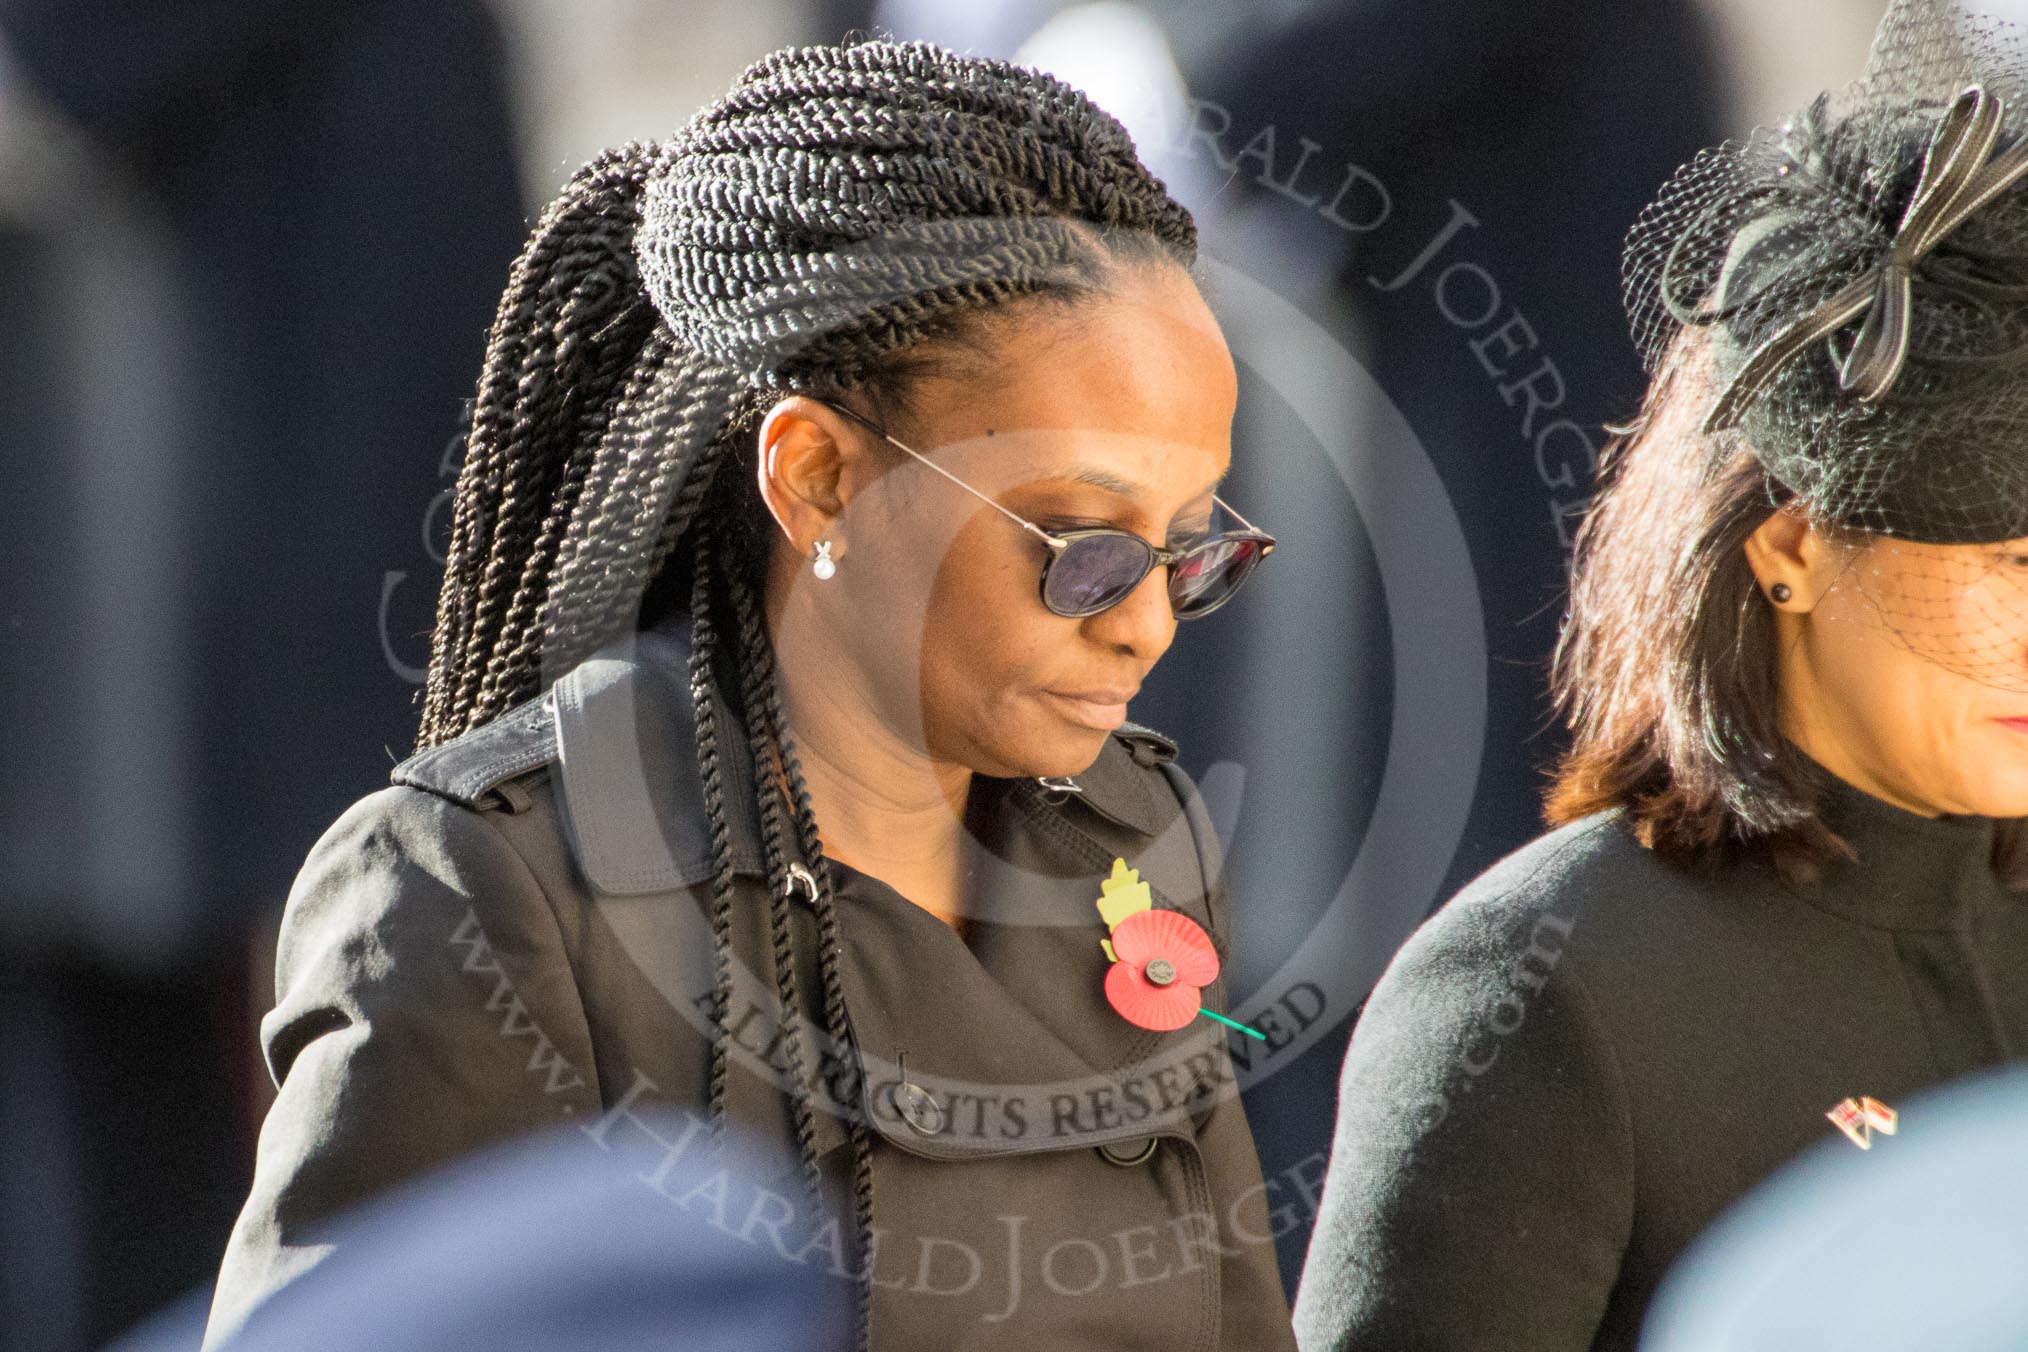 The Acting High Commissioner of Botswana, the  High Commissioner of Guyana, and the  High Commissioner of Singapore, Ms Foo Chi Hsia, during Remembrance Sunday Cenotaph Ceremony 2018 at Horse Guards Parade, Westminster, London, 11 November 2018, 11:13.